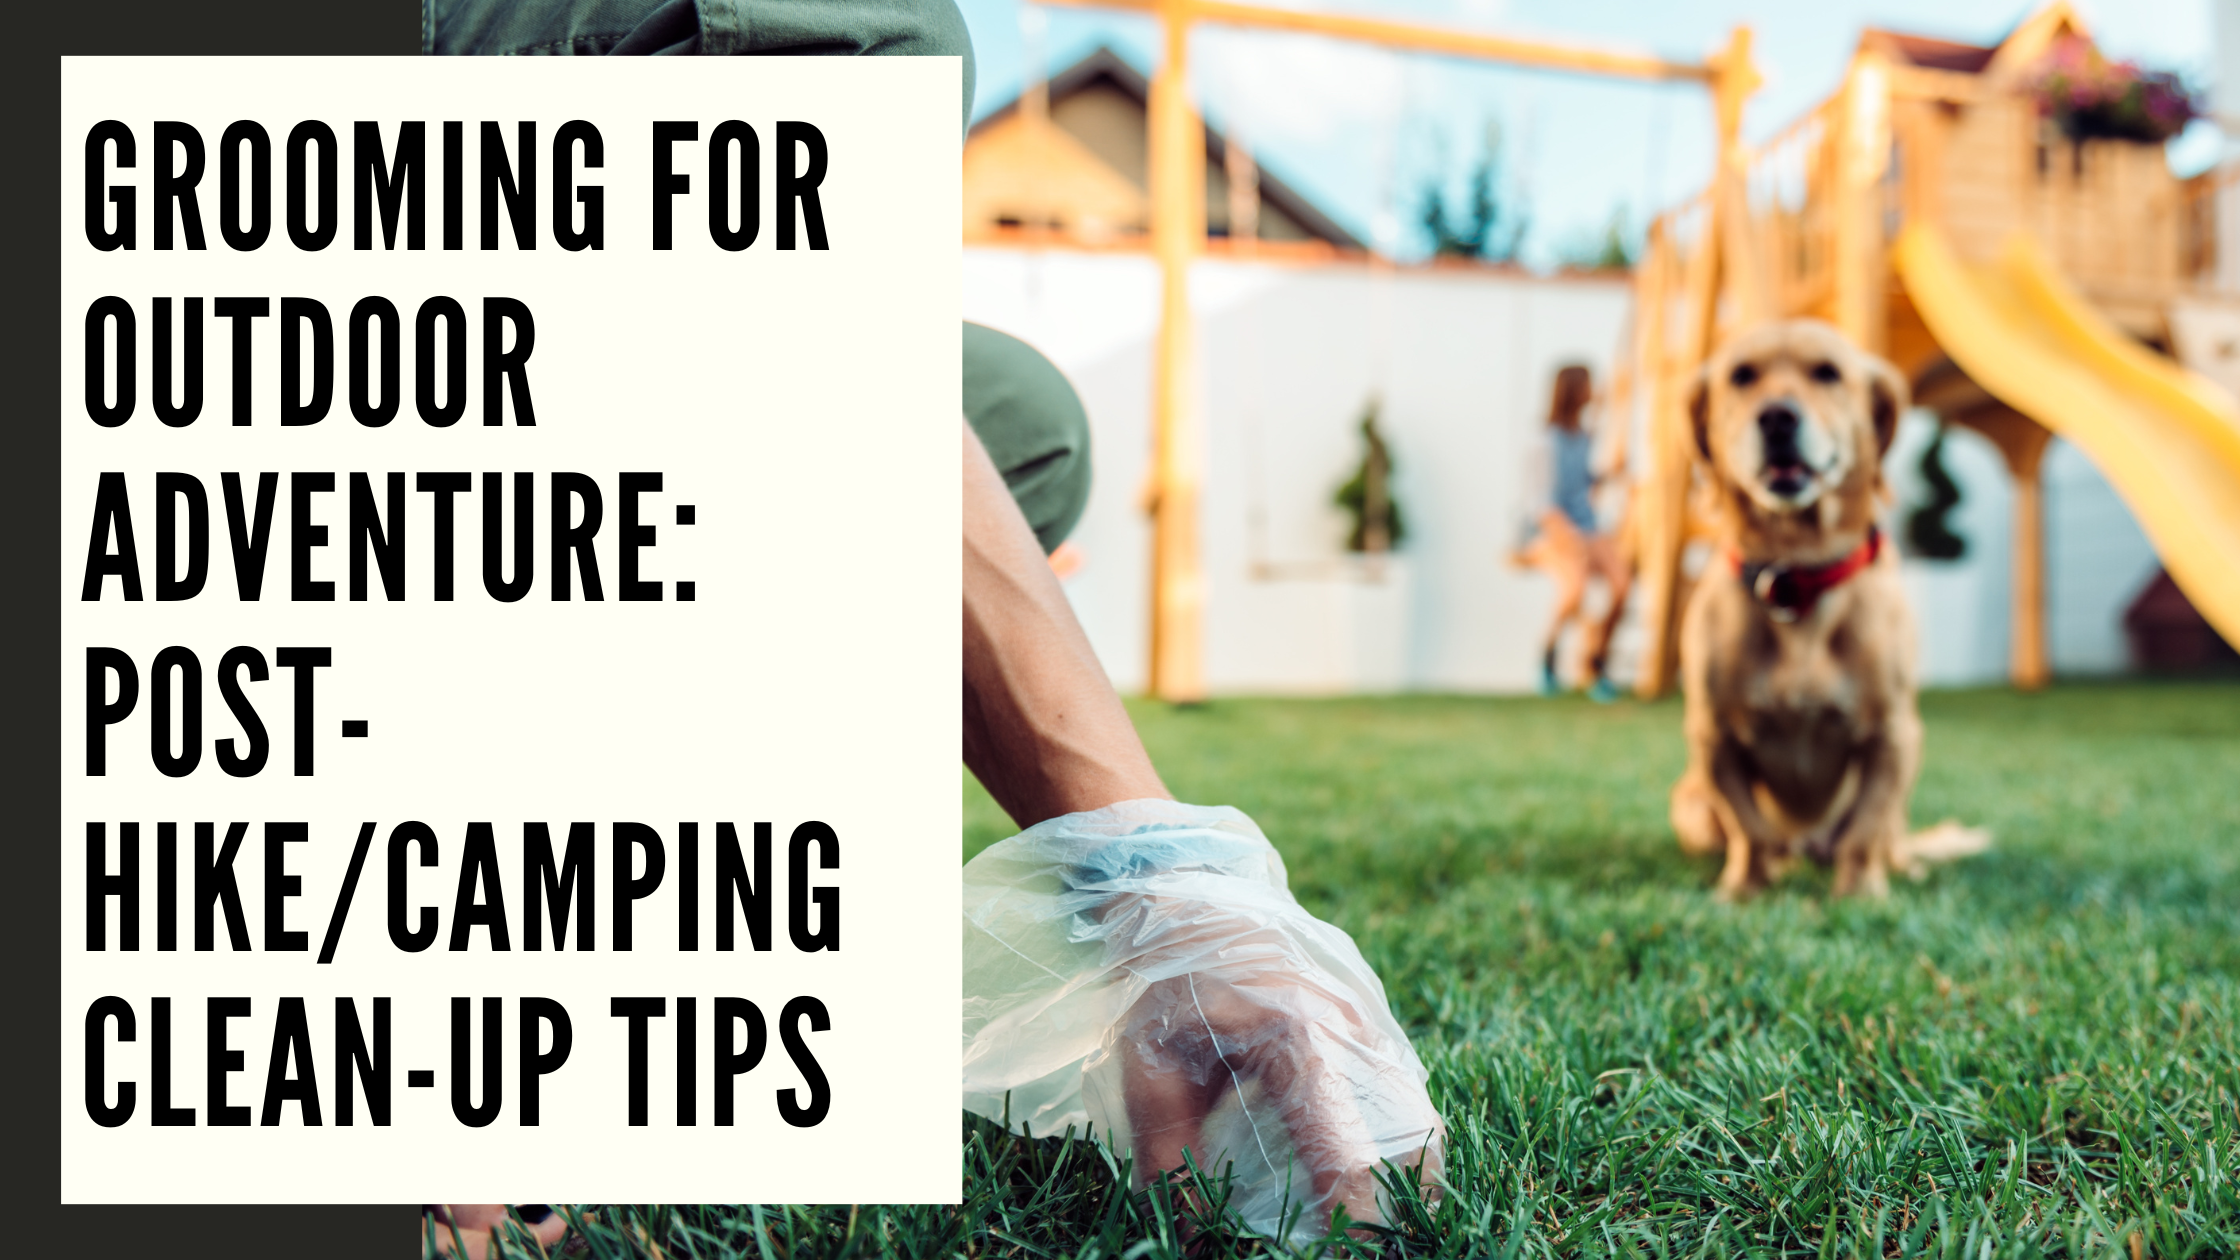 Grooming for Outdoor Adventure Post-HikeCamping Clean-Up Tips